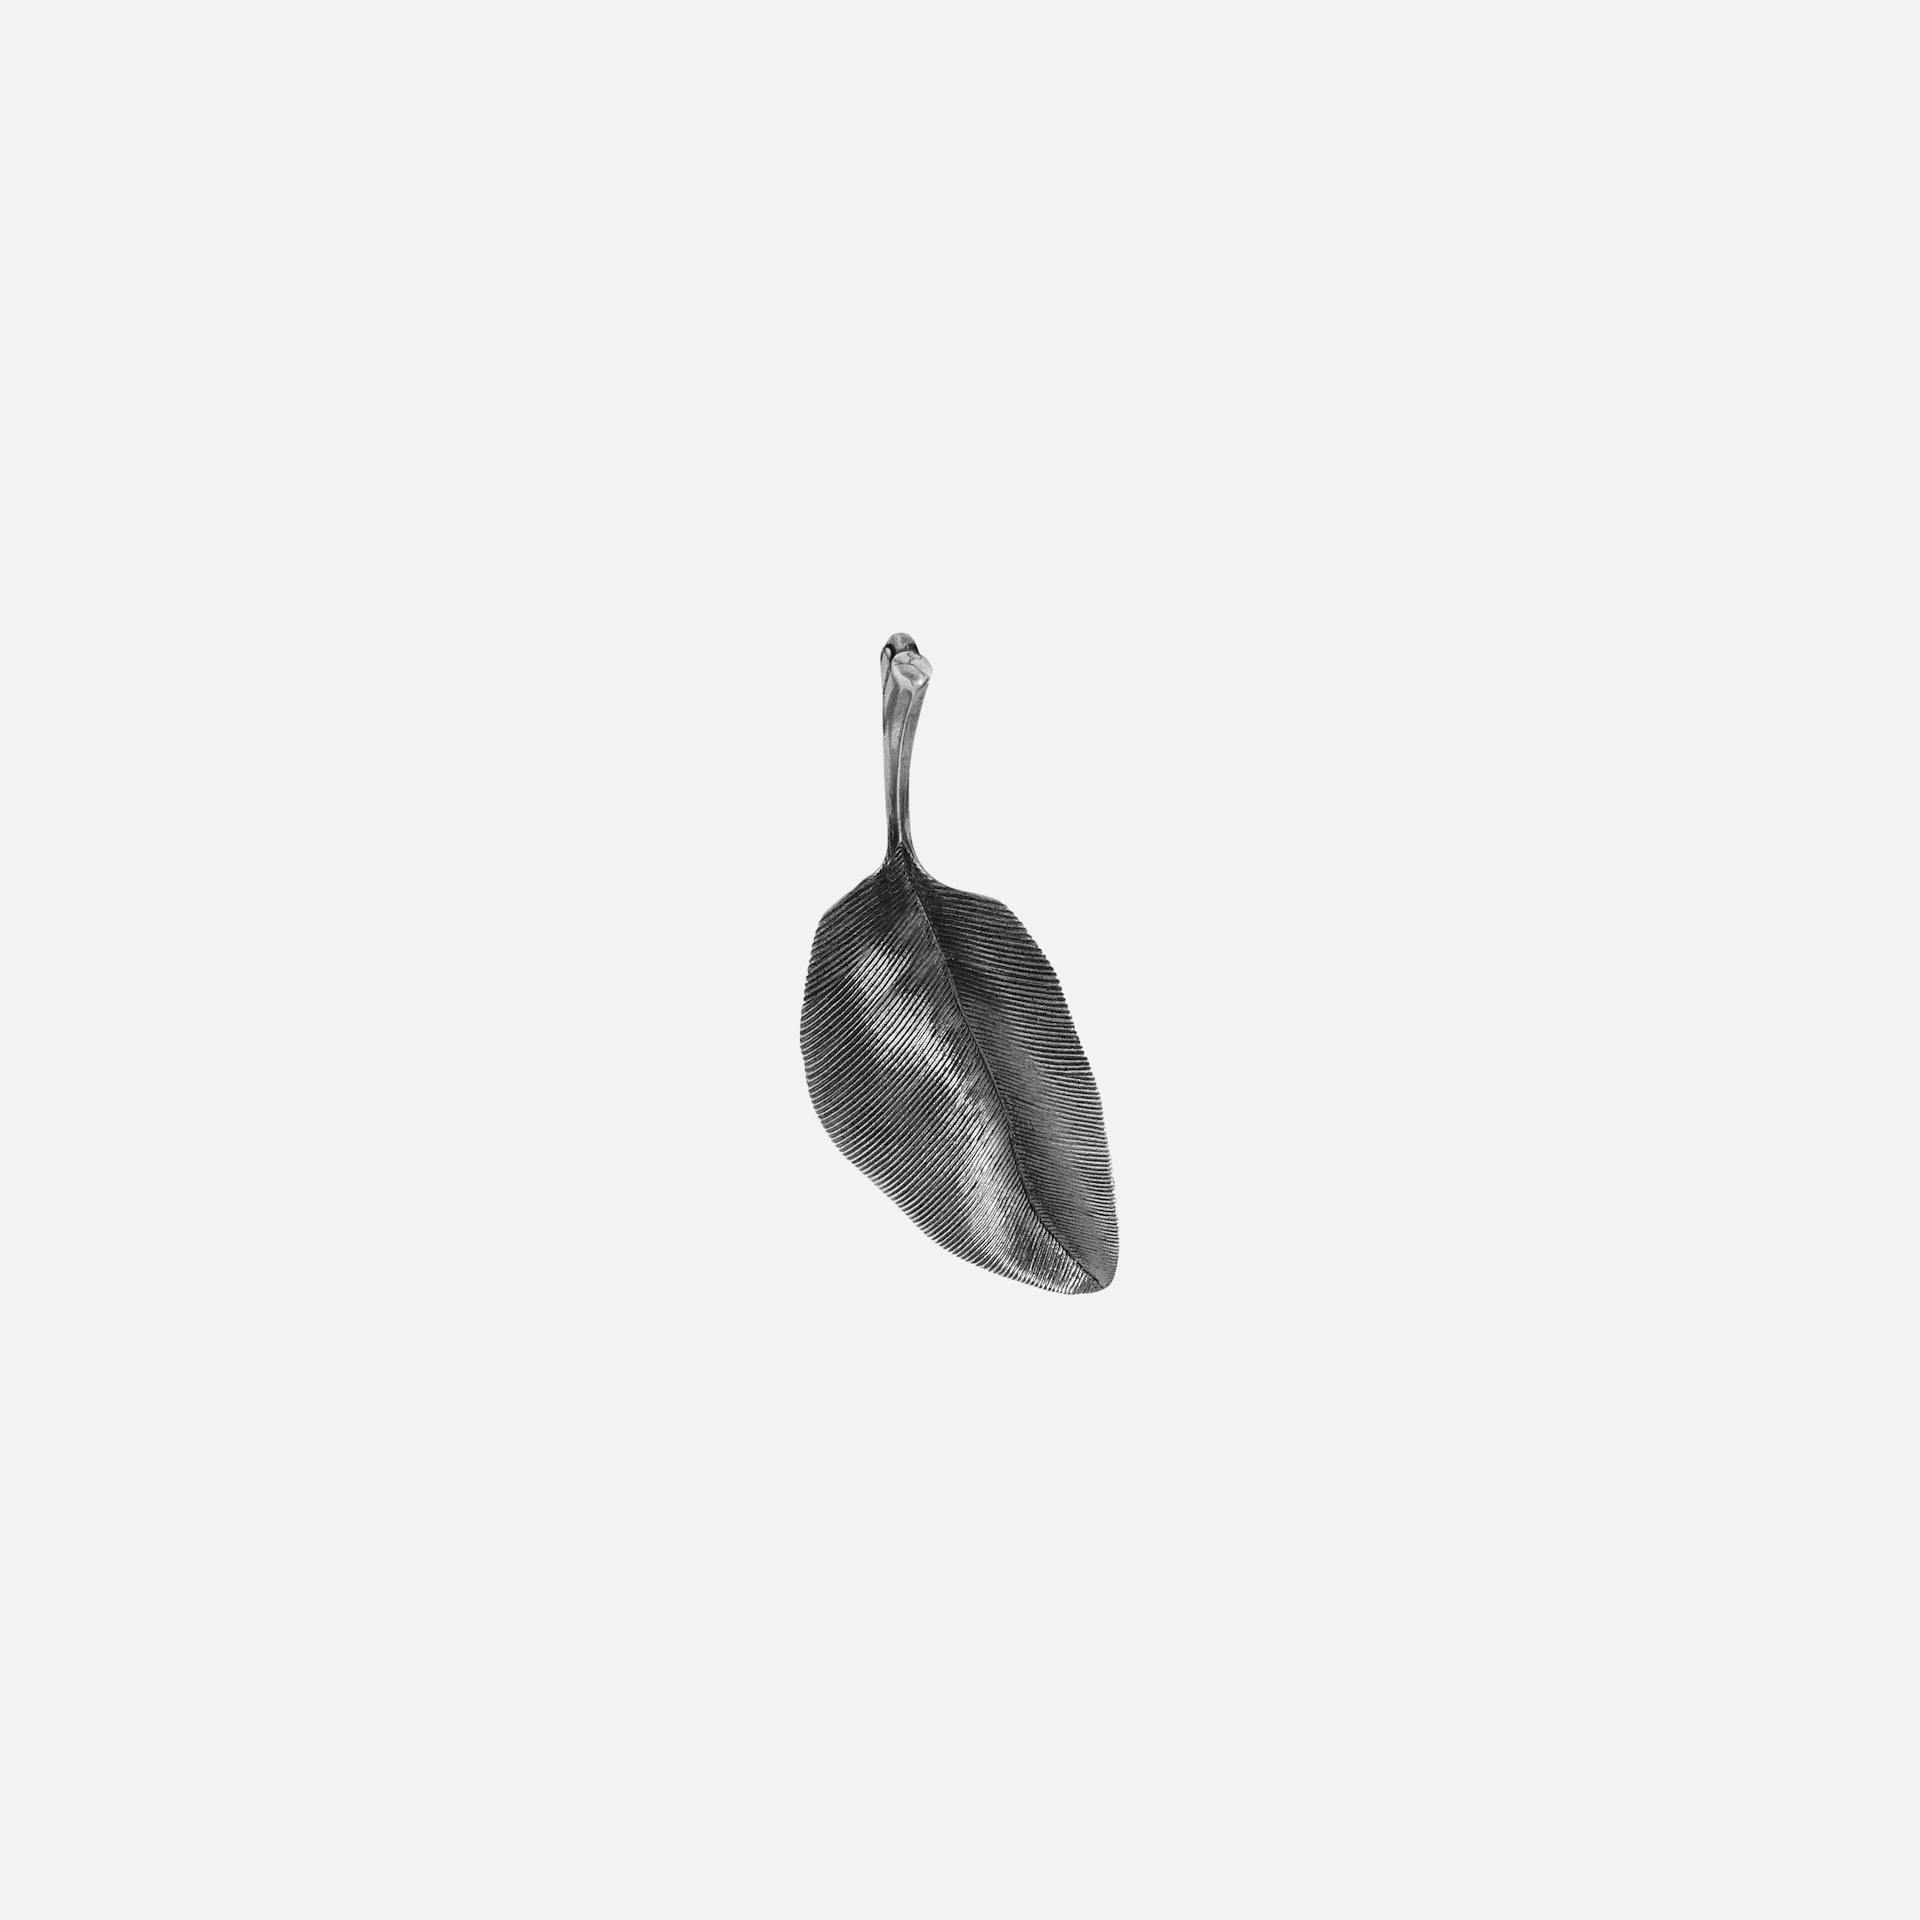 Leaves Collection 3 cm Pendant in Oxidized Sterling Silver   |  Ole Lynggaard Copenhagen